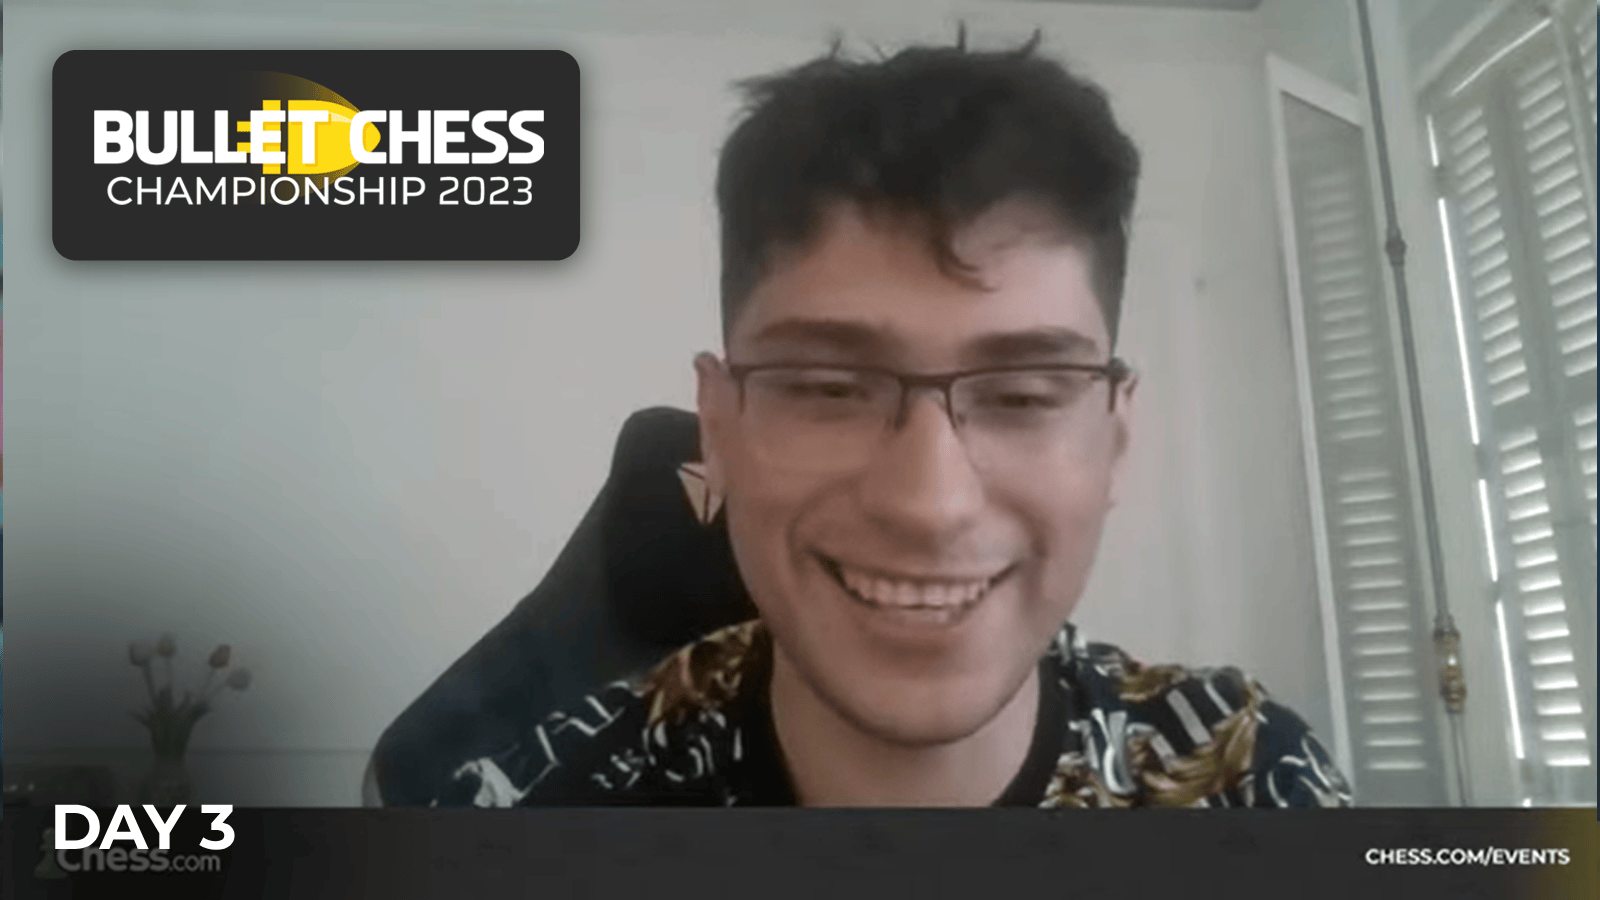 Magnus Carlsen takes down Alireza Firouzja 11.0 - 9.0 in the Losers Final  of the 2023 Bullet Chess Championship : r/chess